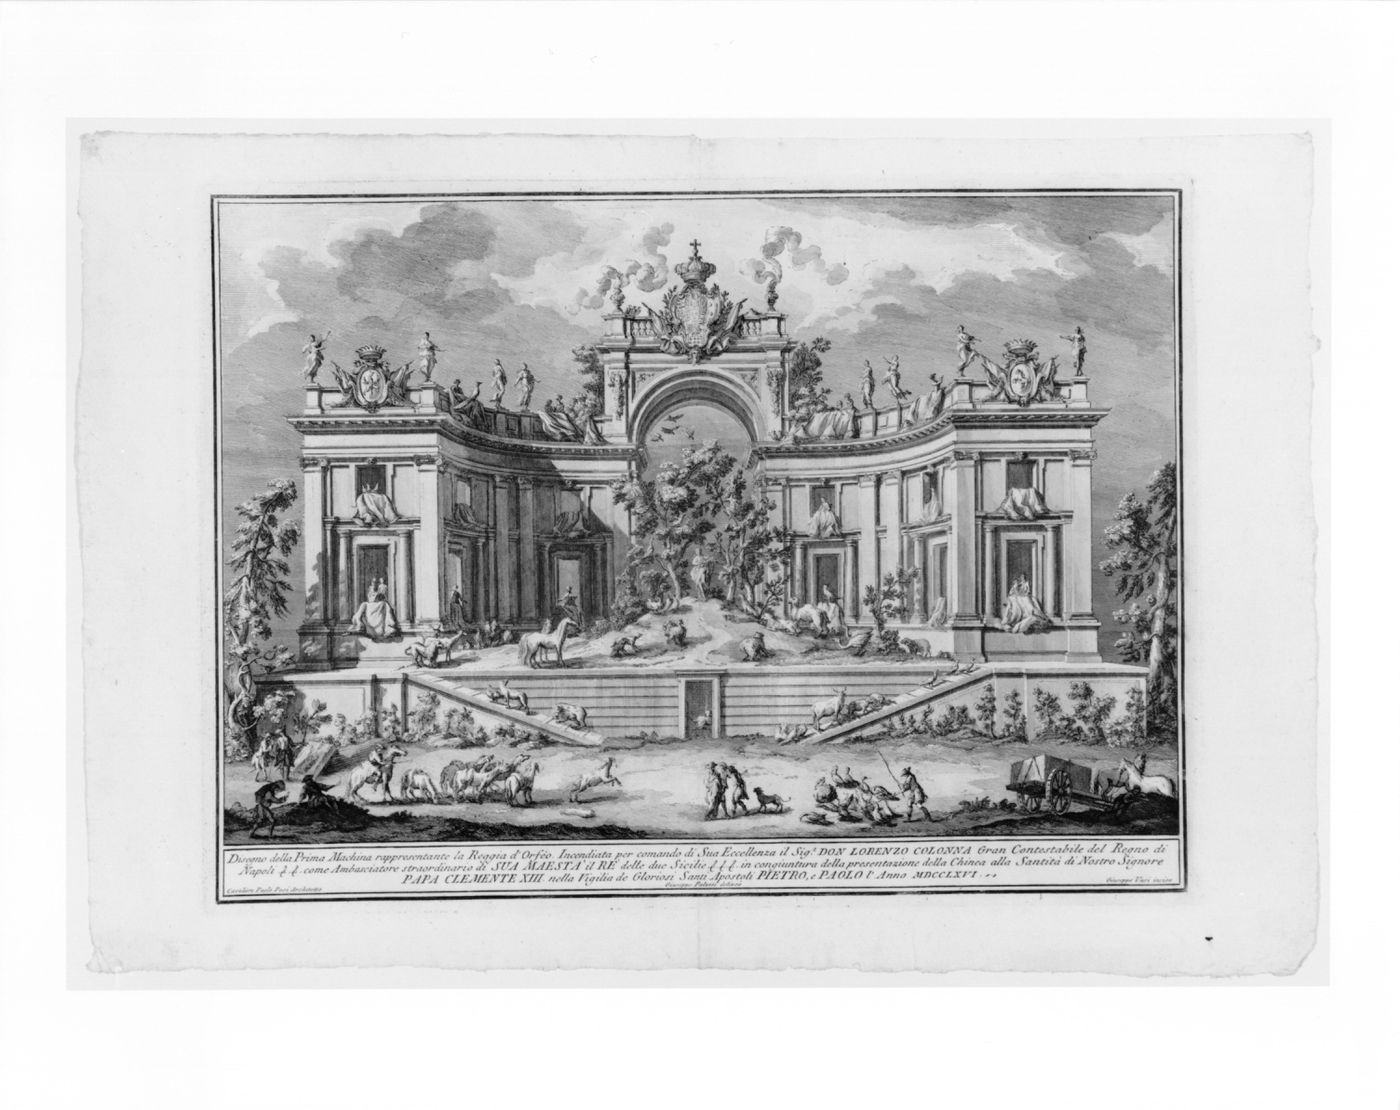 Etching of Posi's design for the "prima macchina" of 1766